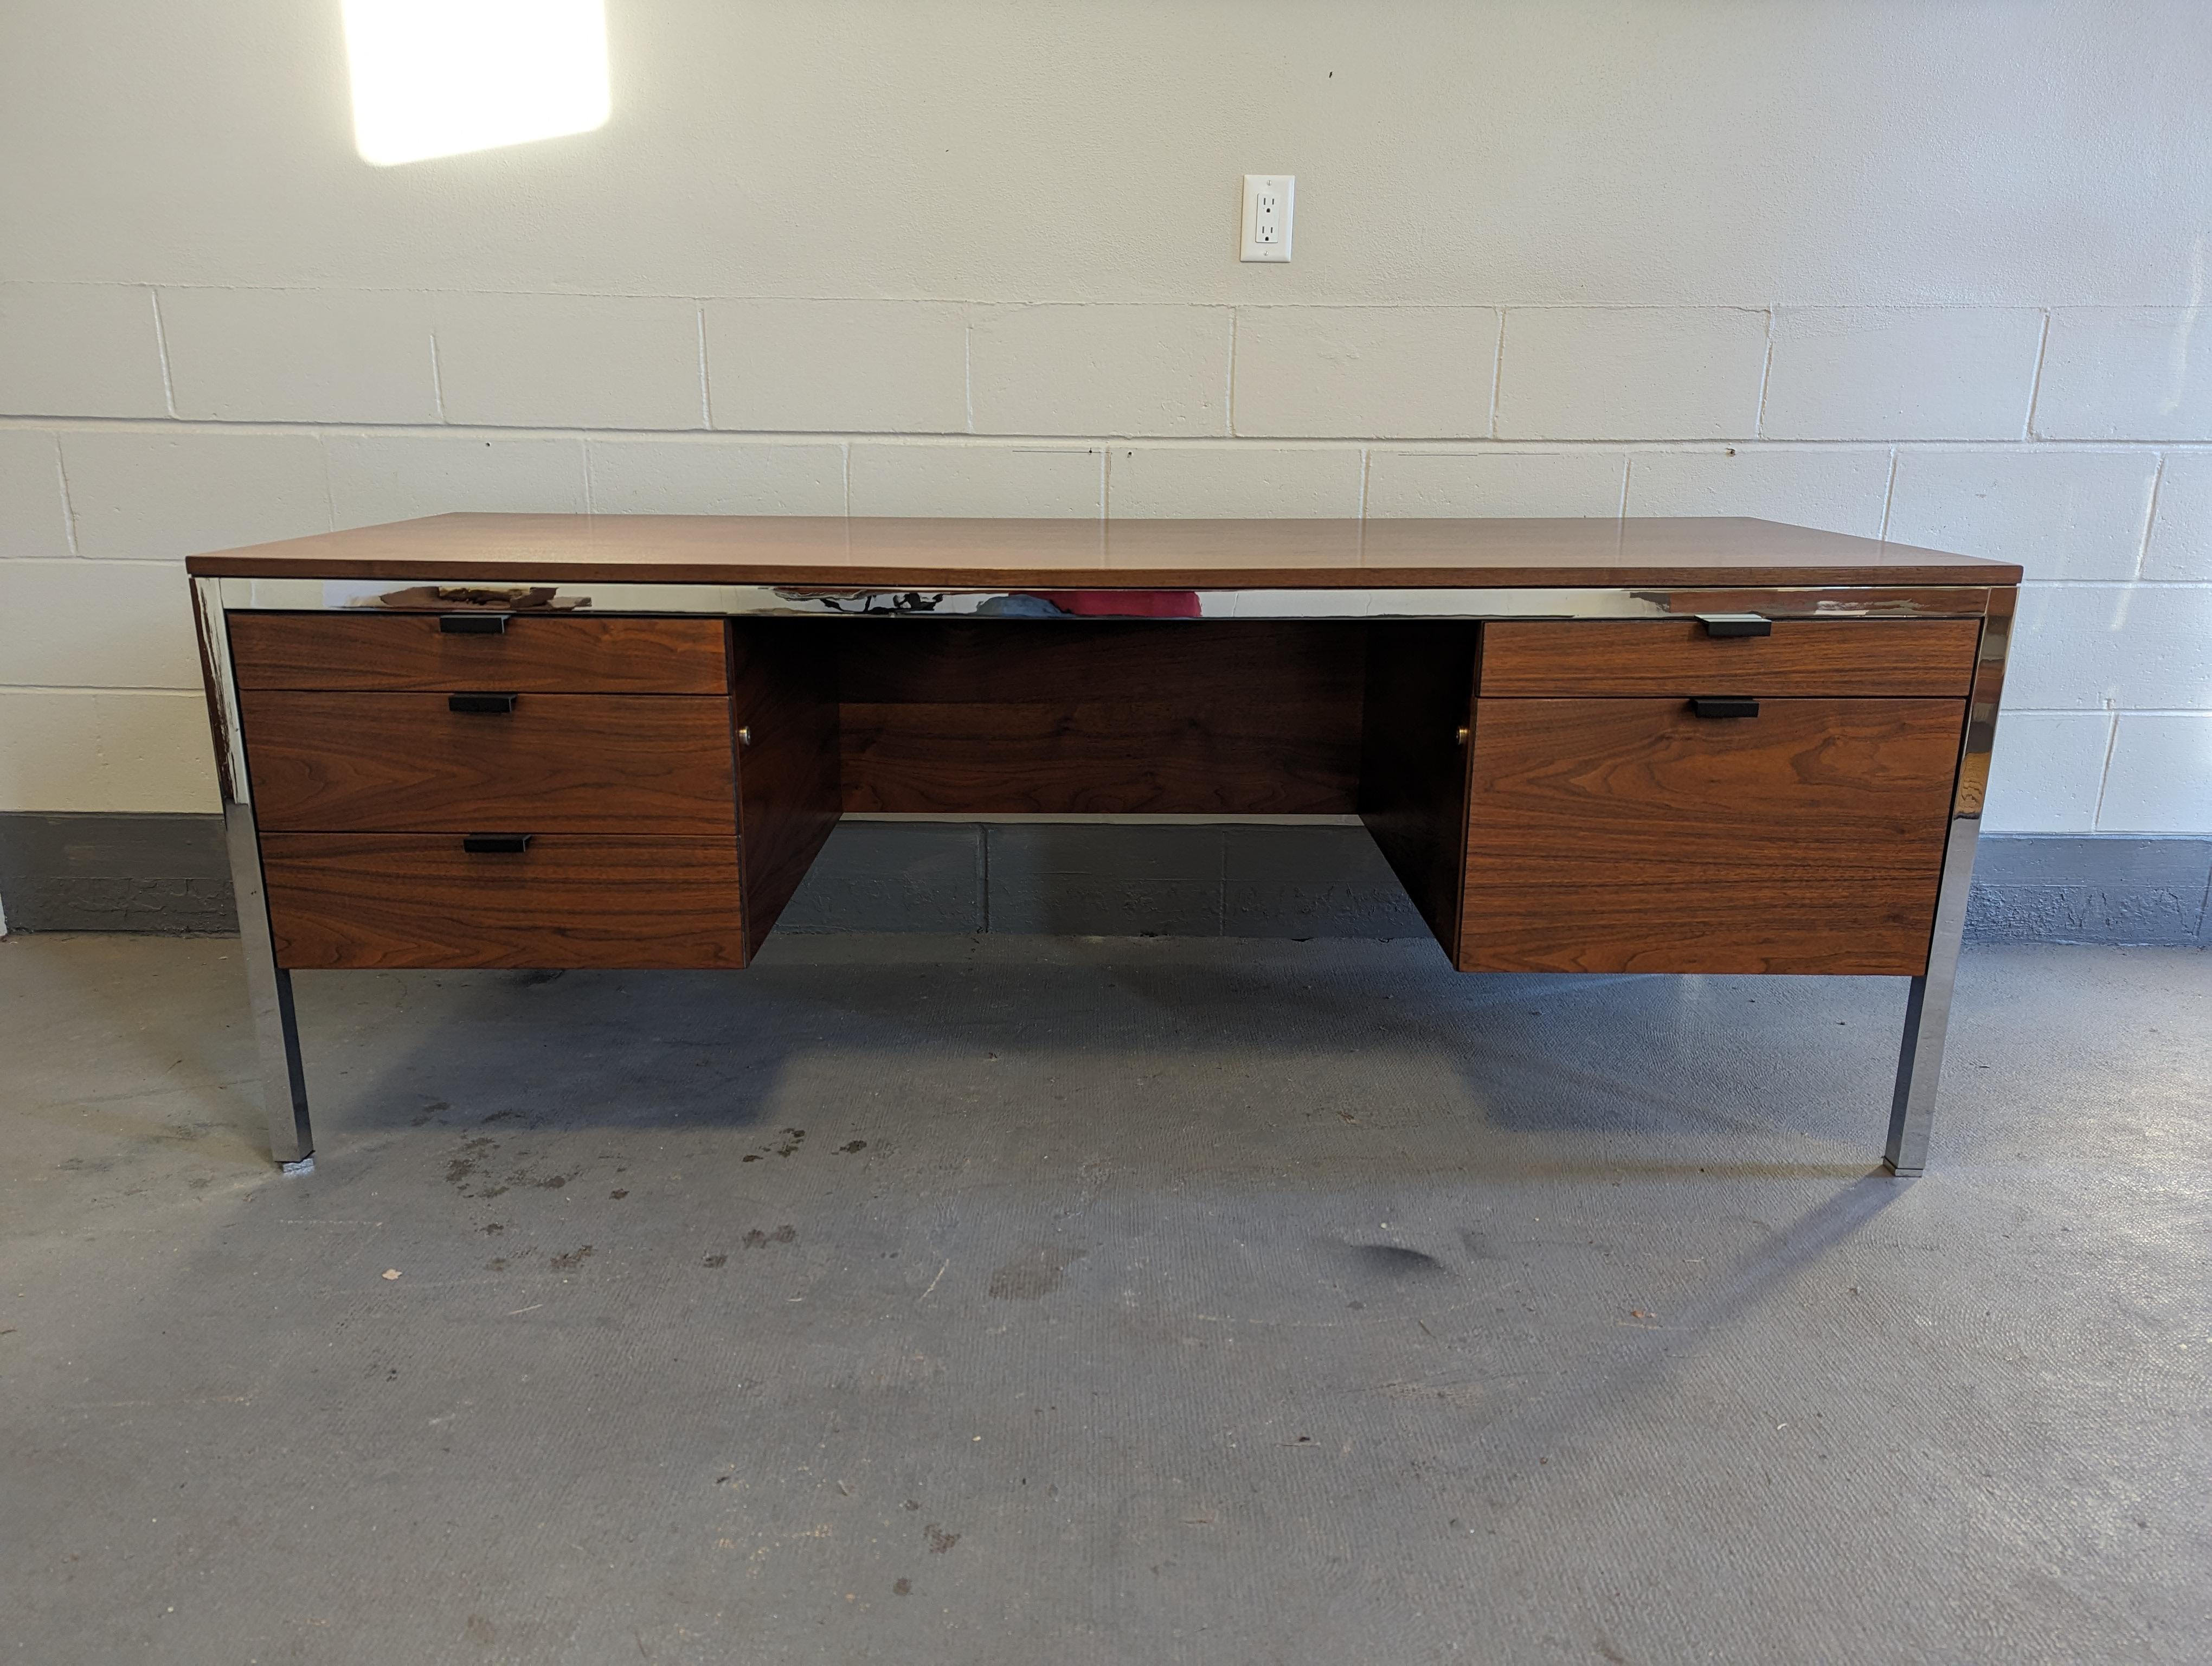 1960s walnut and chrome executive desk in the style of Florence Knoll.

Nice walnut grain and color throughout, including exceptional 76x28 work surface.

Features 5 drawers, complete with dividers and pencil holder. Finished back, beautiful from